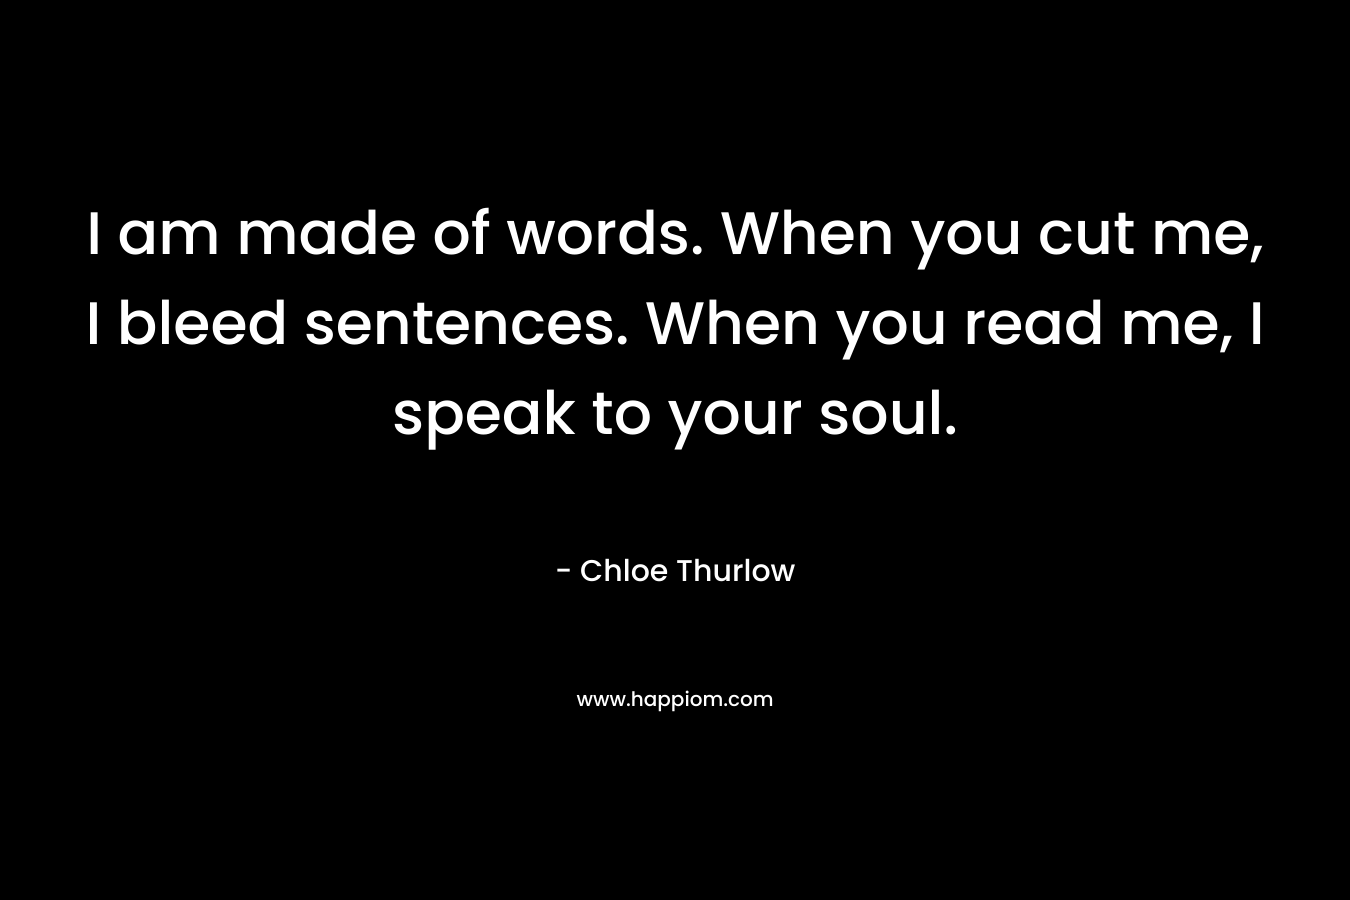 I am made of words. When you cut me, I bleed sentences. When you read me, I speak to your soul. – Chloe Thurlow